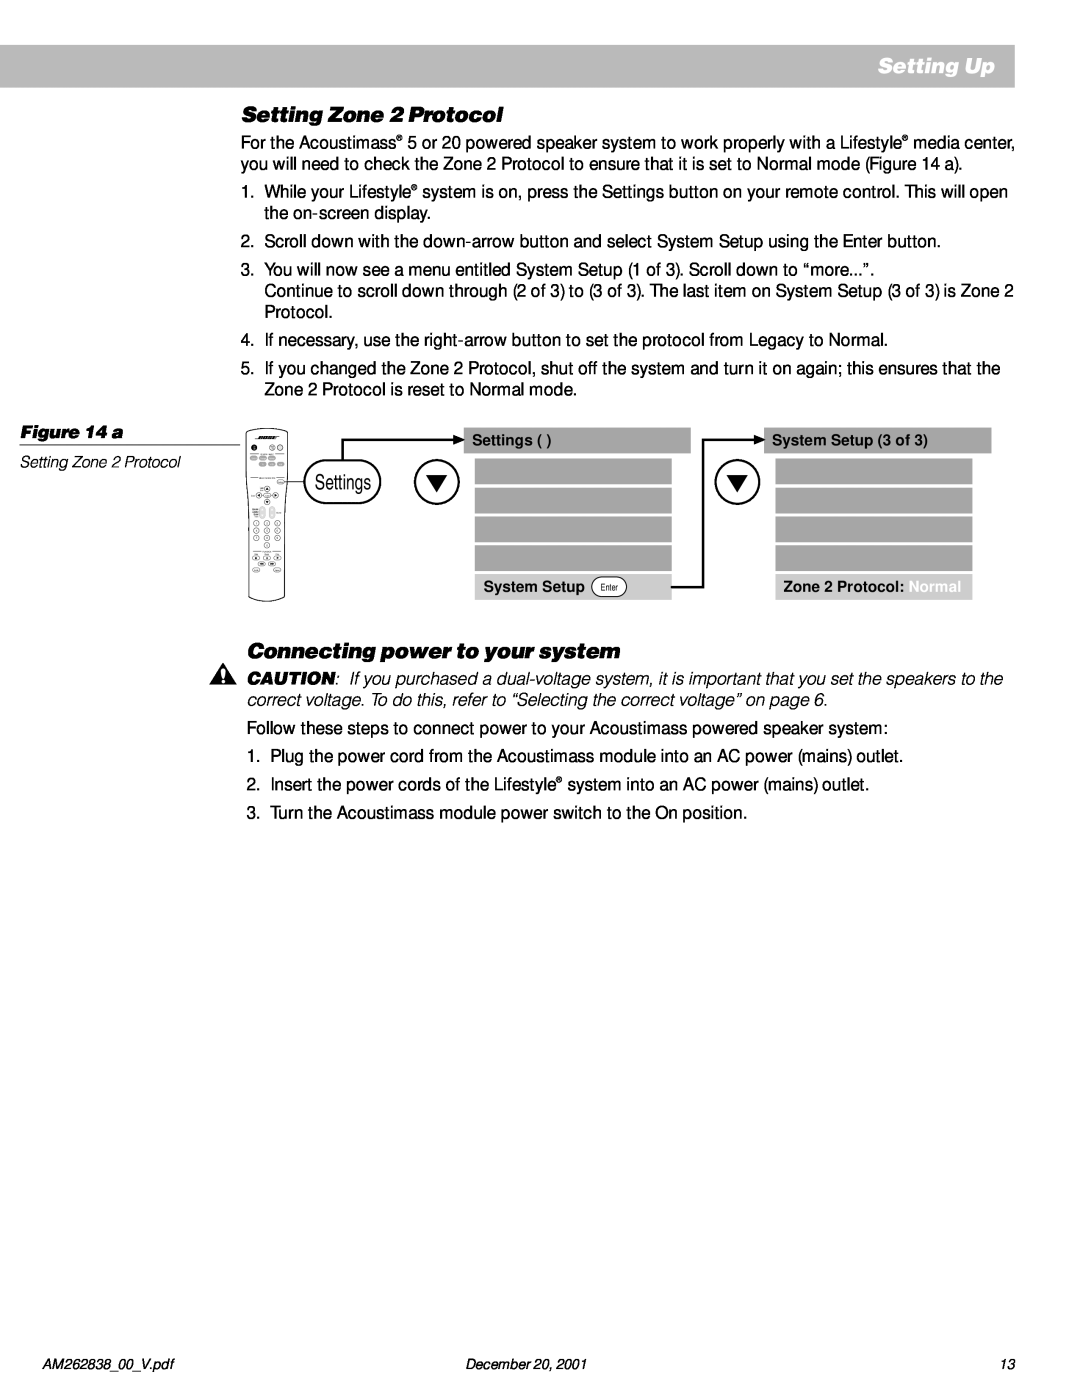 Bose AM262838_00_V manual Setting Zone 2 Protocol, Setting Up, Settings, Connecting power to your system 